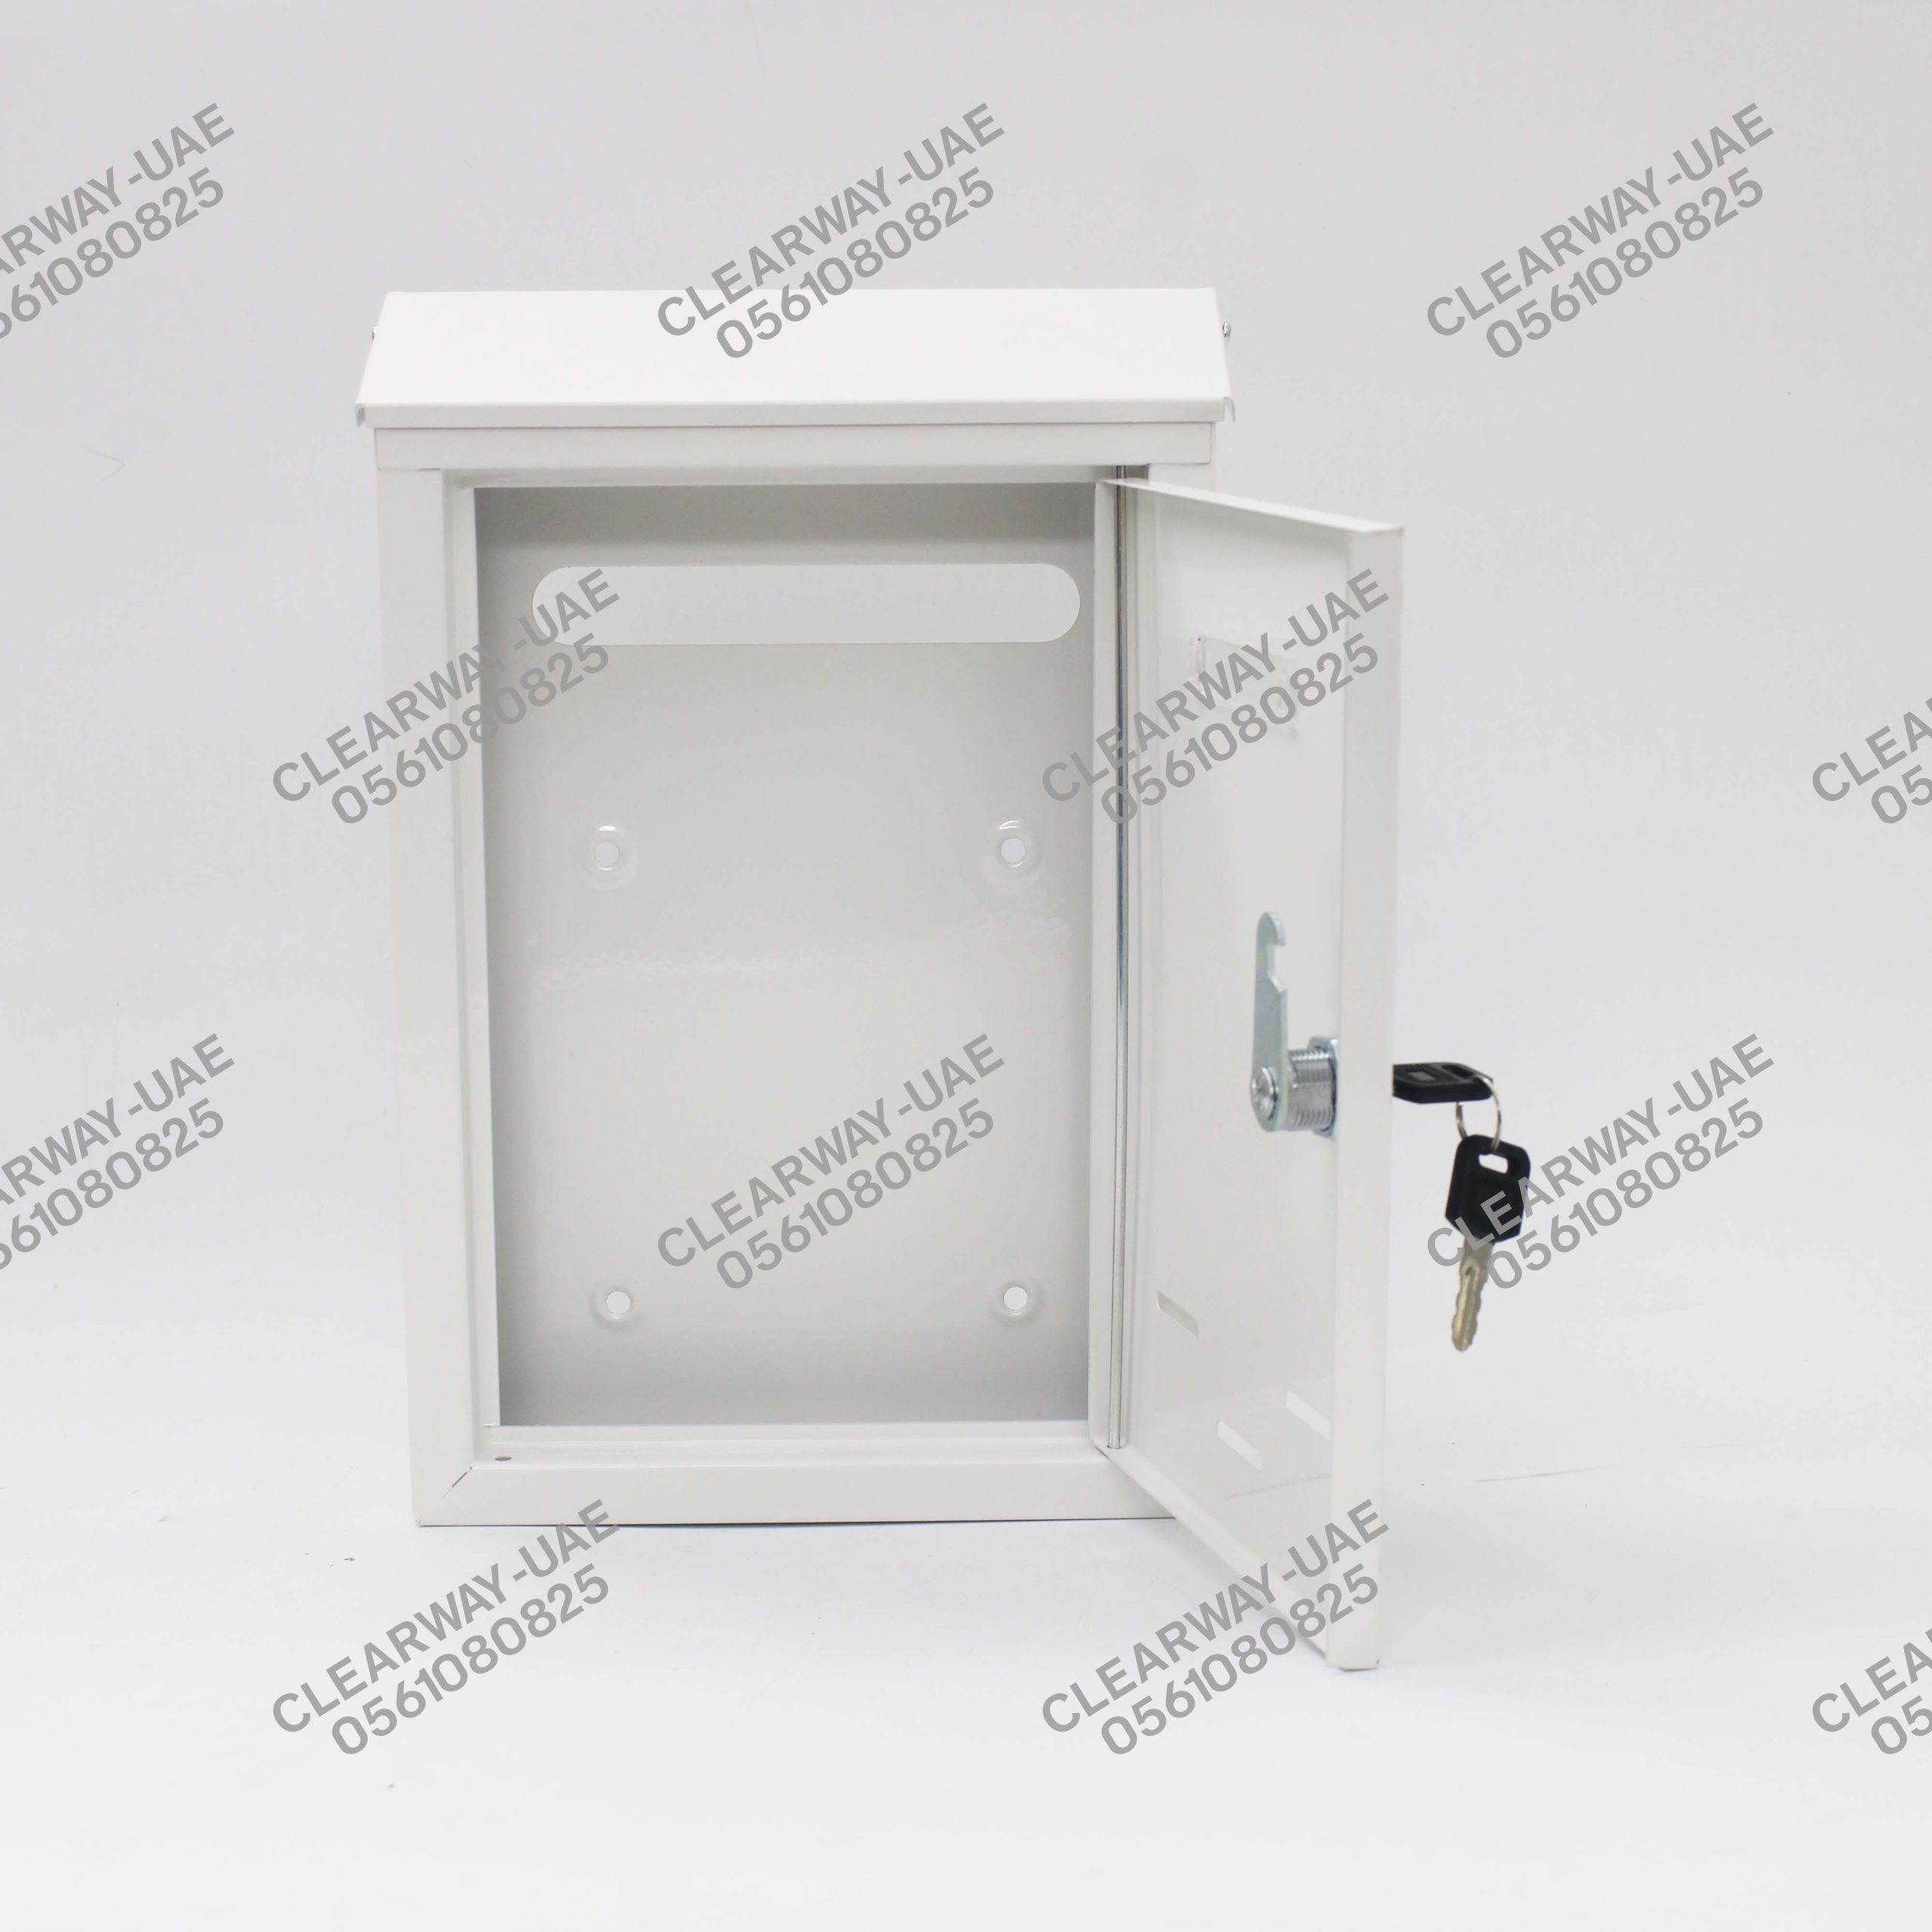 METAL LETTER BOX SMALL SUPPLIER UAE CLEARWAY RYXO SAFETY6